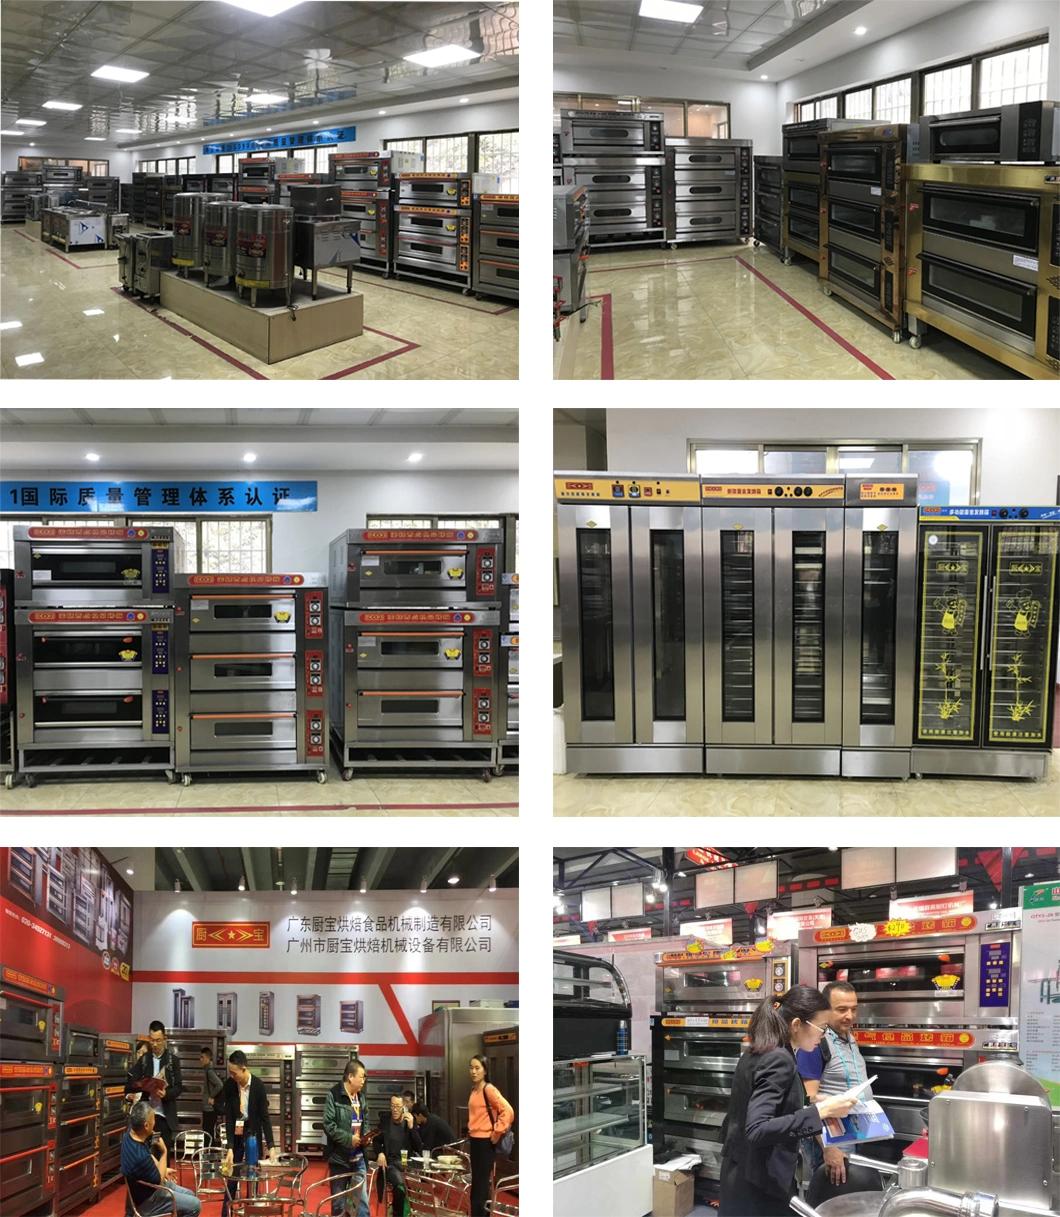 Commercial Restaurant Kitchen 1 Deck 2 Trays Luxury Gas Oven for Baking Equipment Bakery Machine Food Equipment with Computer Controller Cake Oven